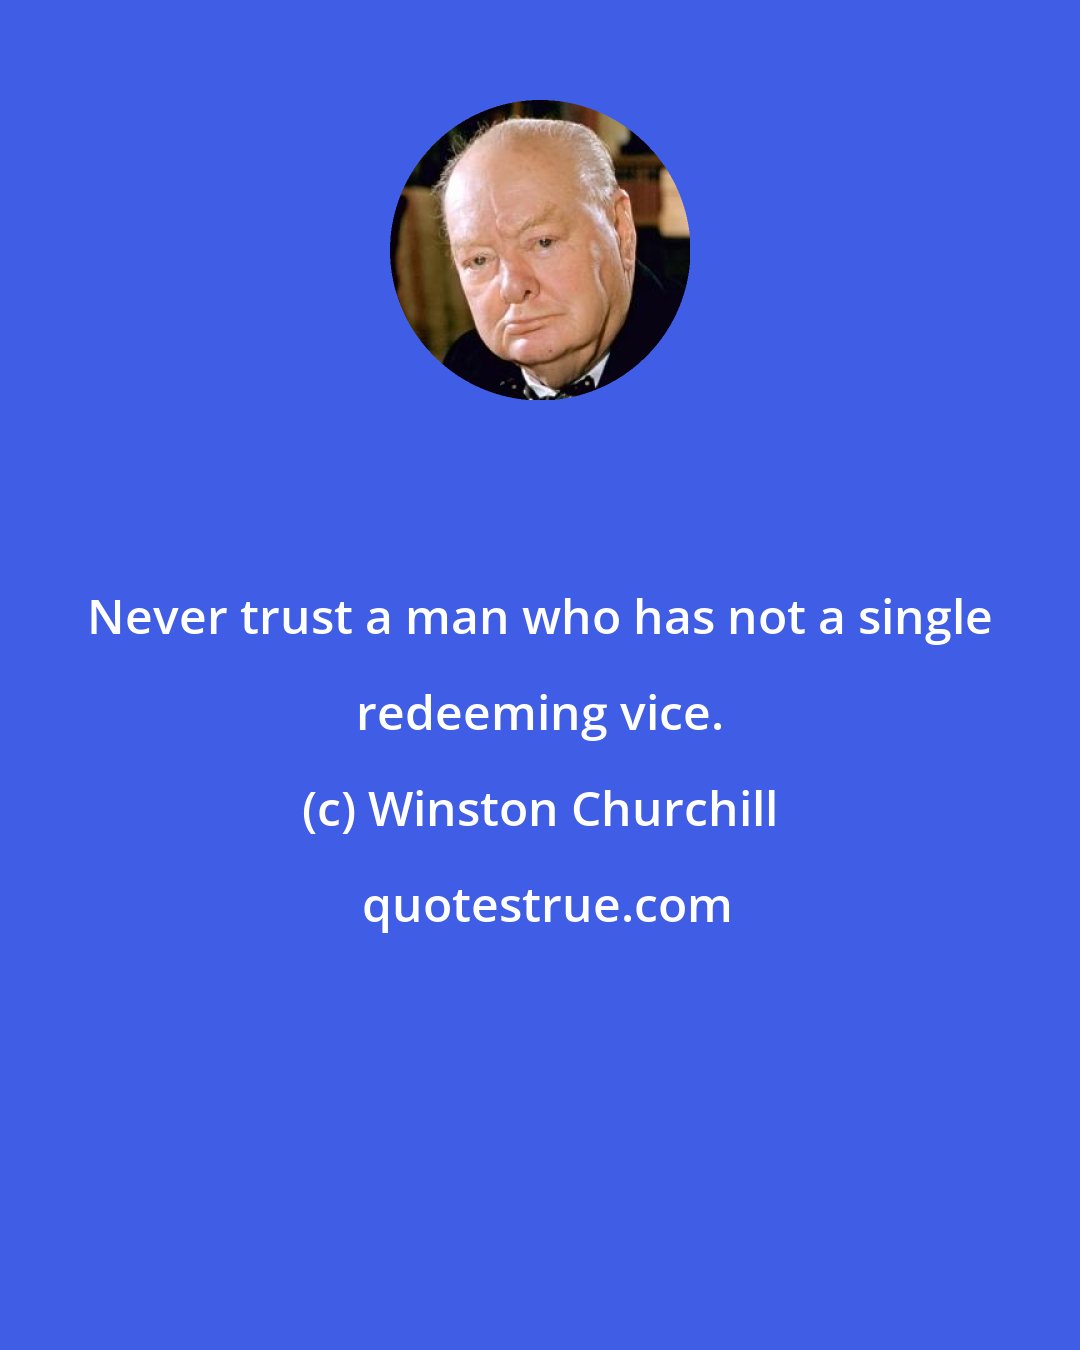 Winston Churchill: Never trust a man who has not a single redeeming vice.